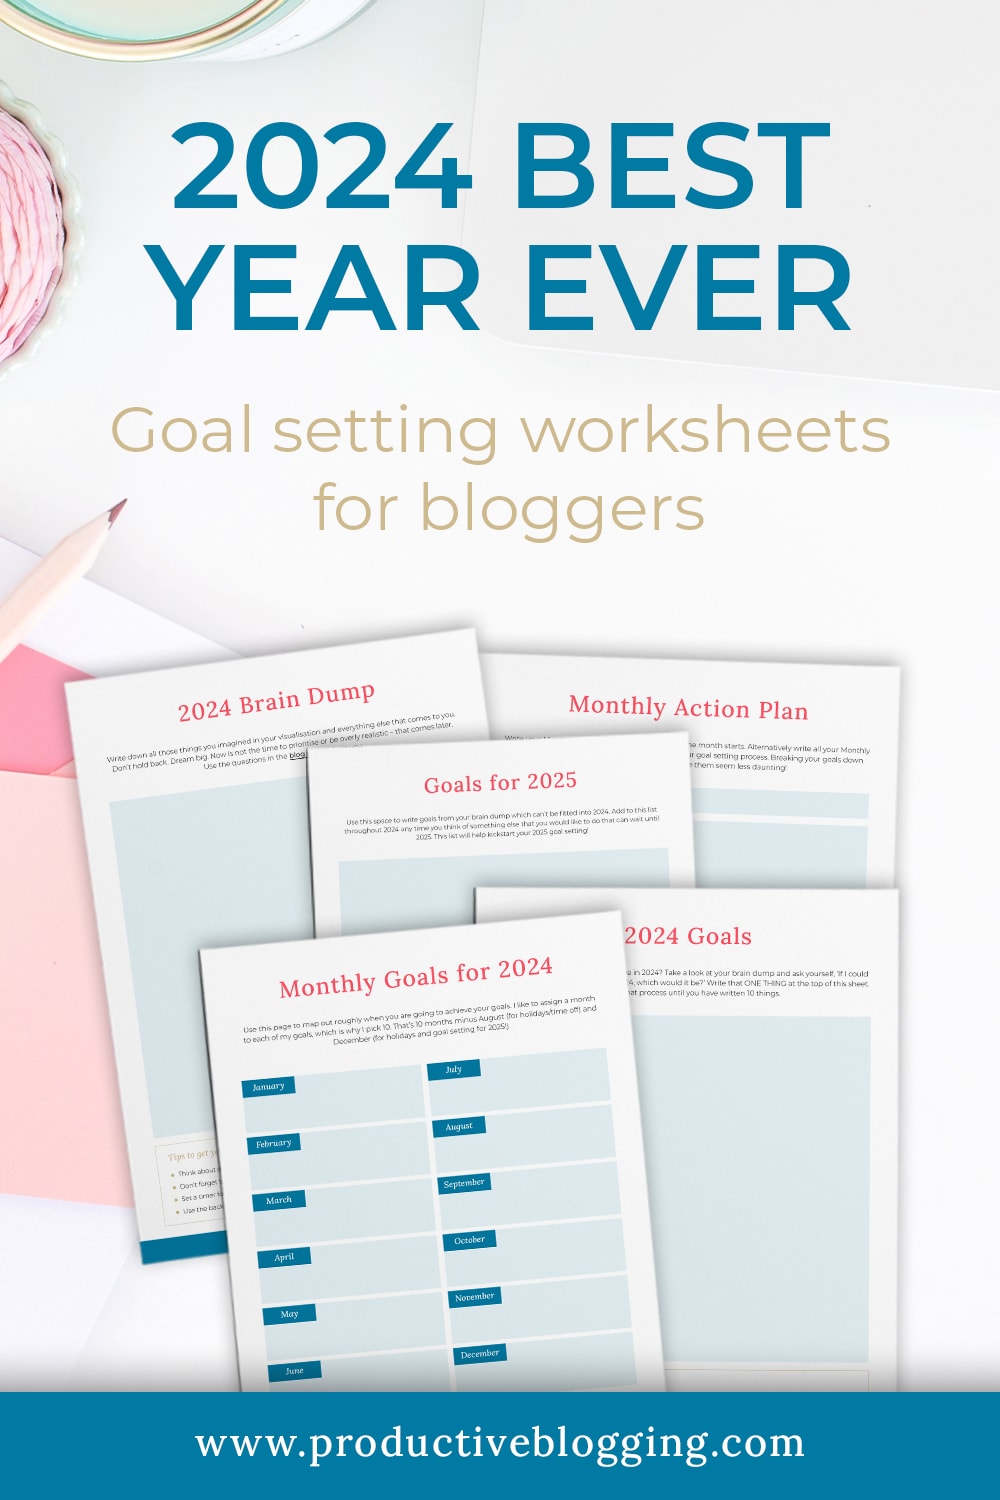 2024 BEST YEAR EVER goal setting worksheets for bloggers. #2024goals #goalsetting #goalsetting2024 #2024planning #2024planner #2024plans #blogginggoals #bloggingdreams #blogplanner #blogplanning #blogplanning2024 #blogplanner2024